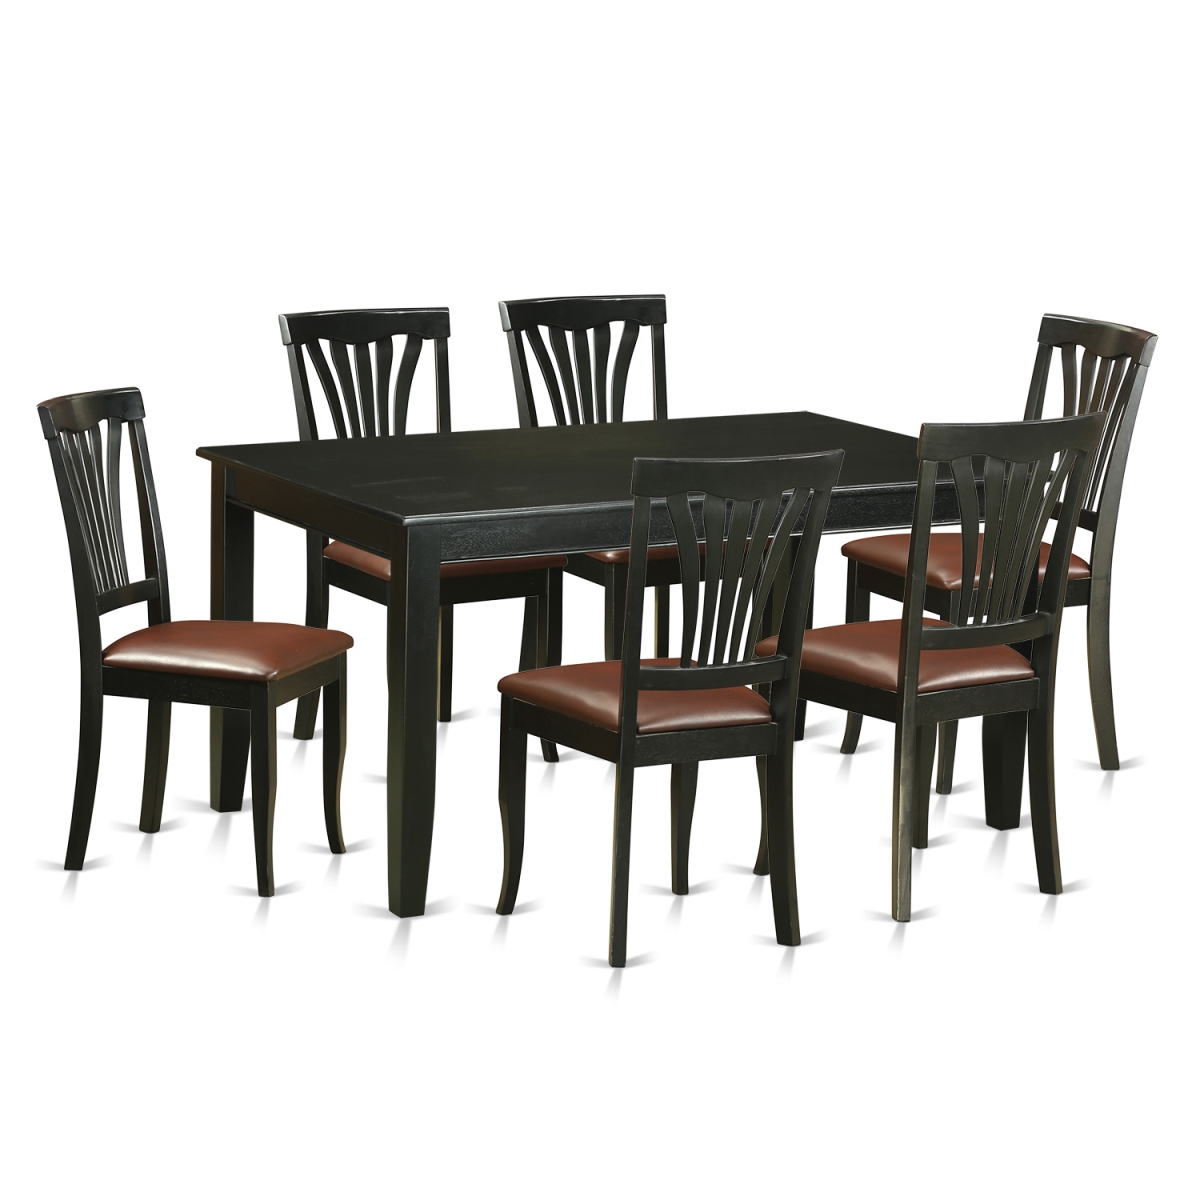 DUAV7-BLK-LC Dining Table Set - Kitchen Table & 6 Chairs, Black - 7 Piece -  East West Furniture